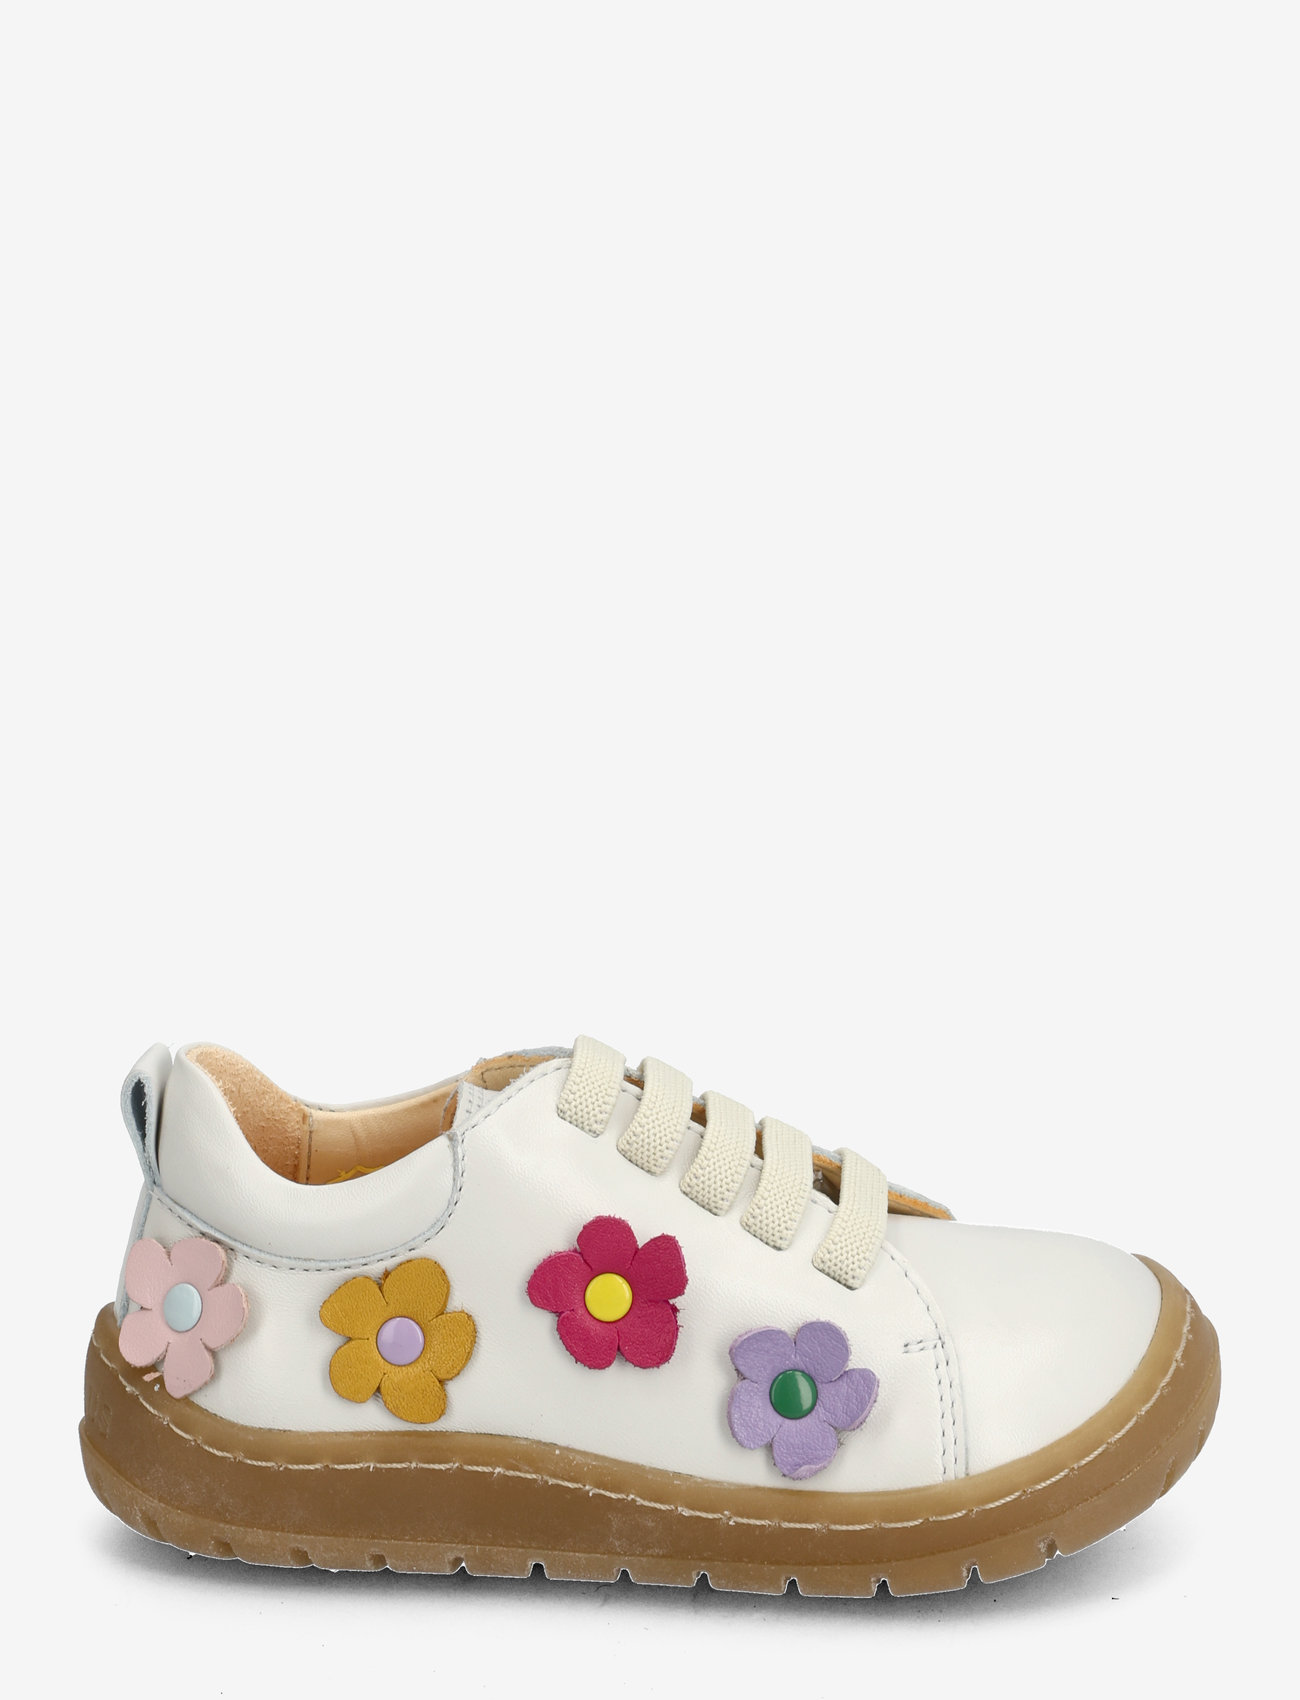 ANGULUS - Shoes - flat - with lace - sommerkupp - 1493/a002 off white/flowers - 1